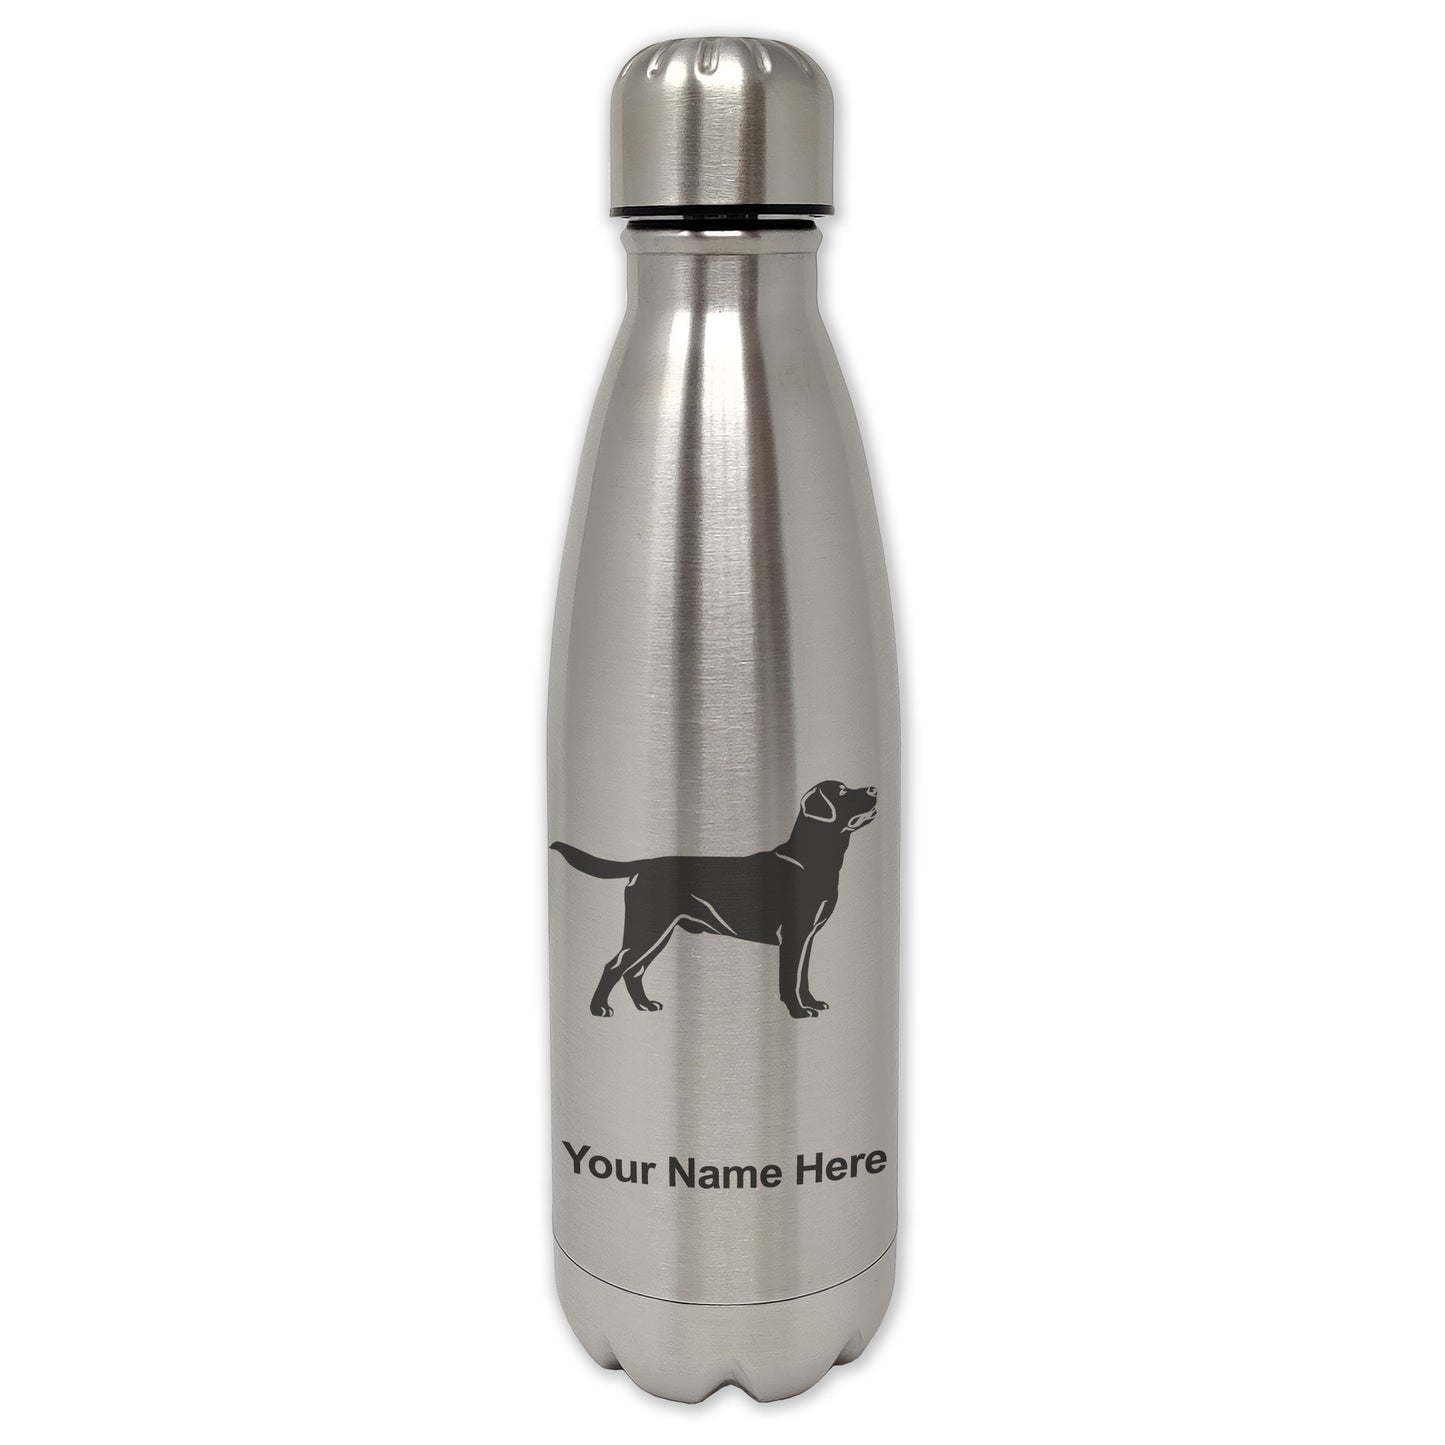 LaserGram Single Wall Water Bottle, Labrador Retriever Dog, Personalized Engraving Included